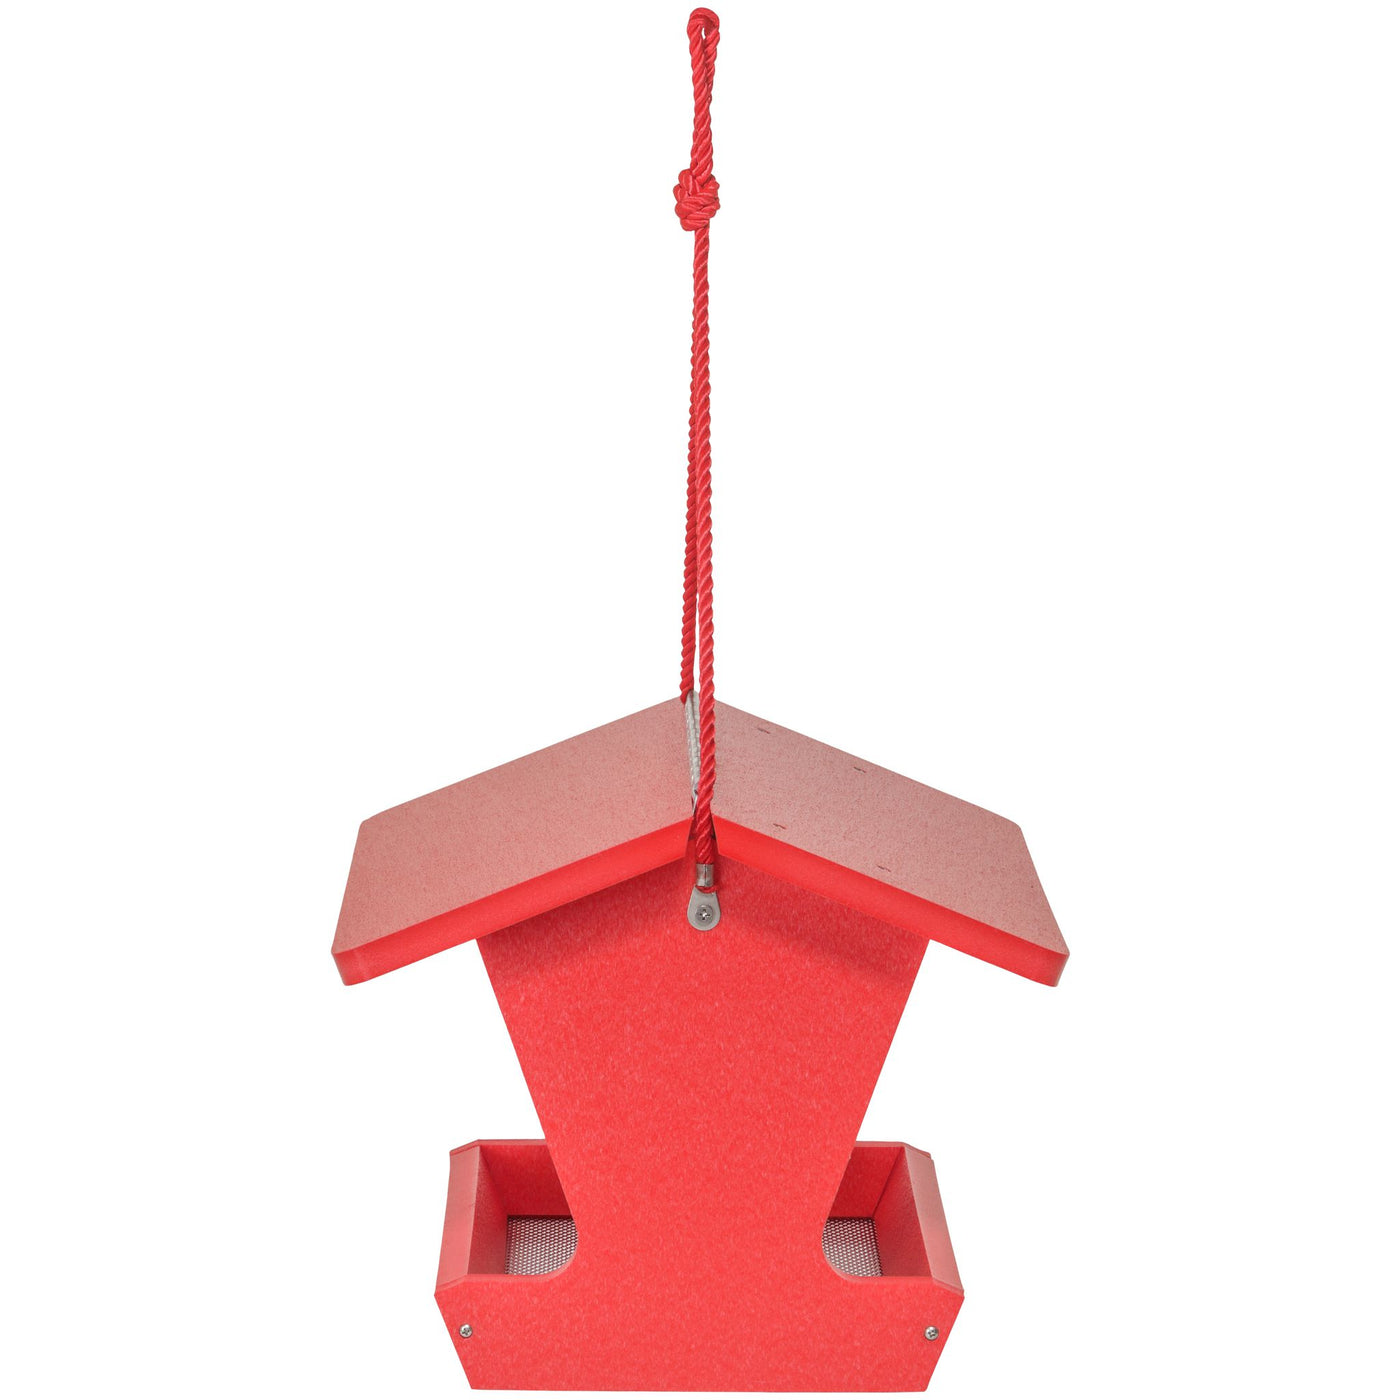 Hopper Bird Feeder Color Pop Collection in Red Recycled Plastic - Birds Choice